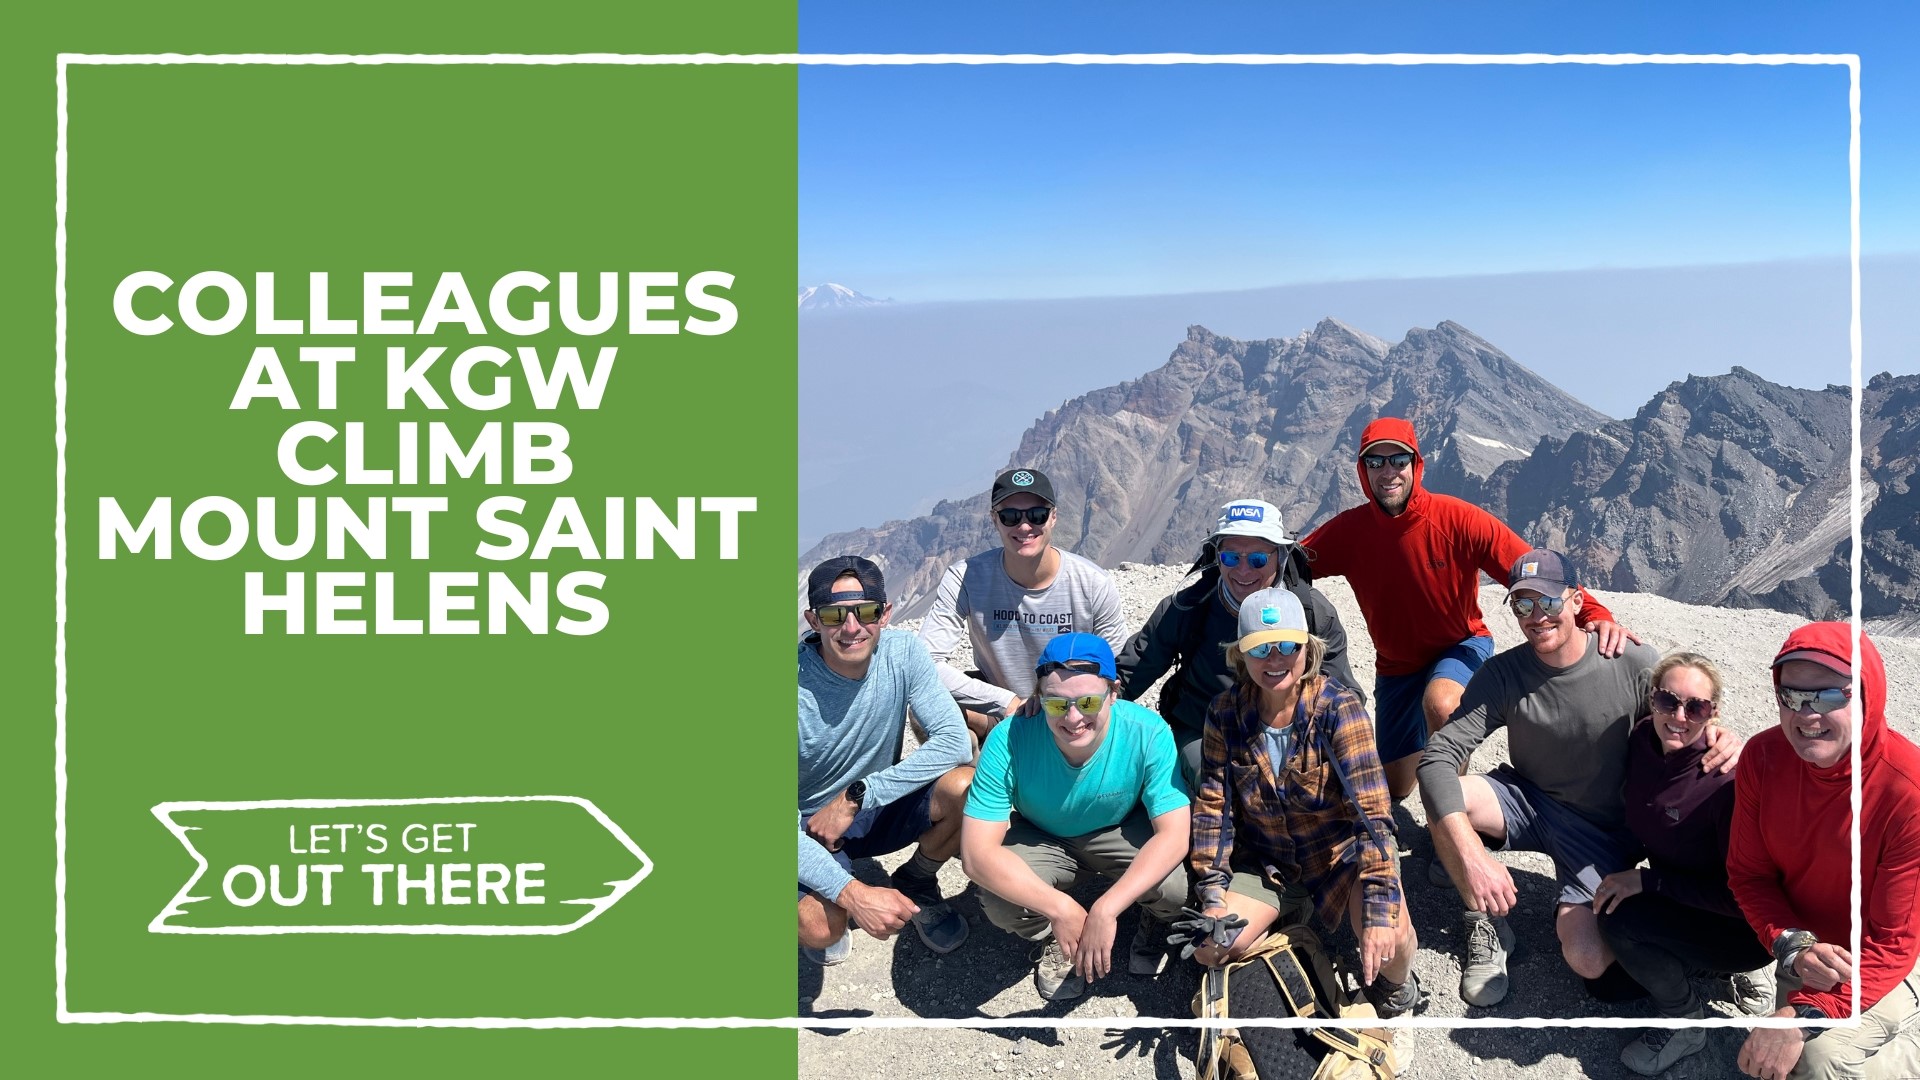 In this week's Let's Get Out There, a group of KGW colleagues went up Saint Helens with Jon Goodwin for a remarkable adventure with beautiful views.